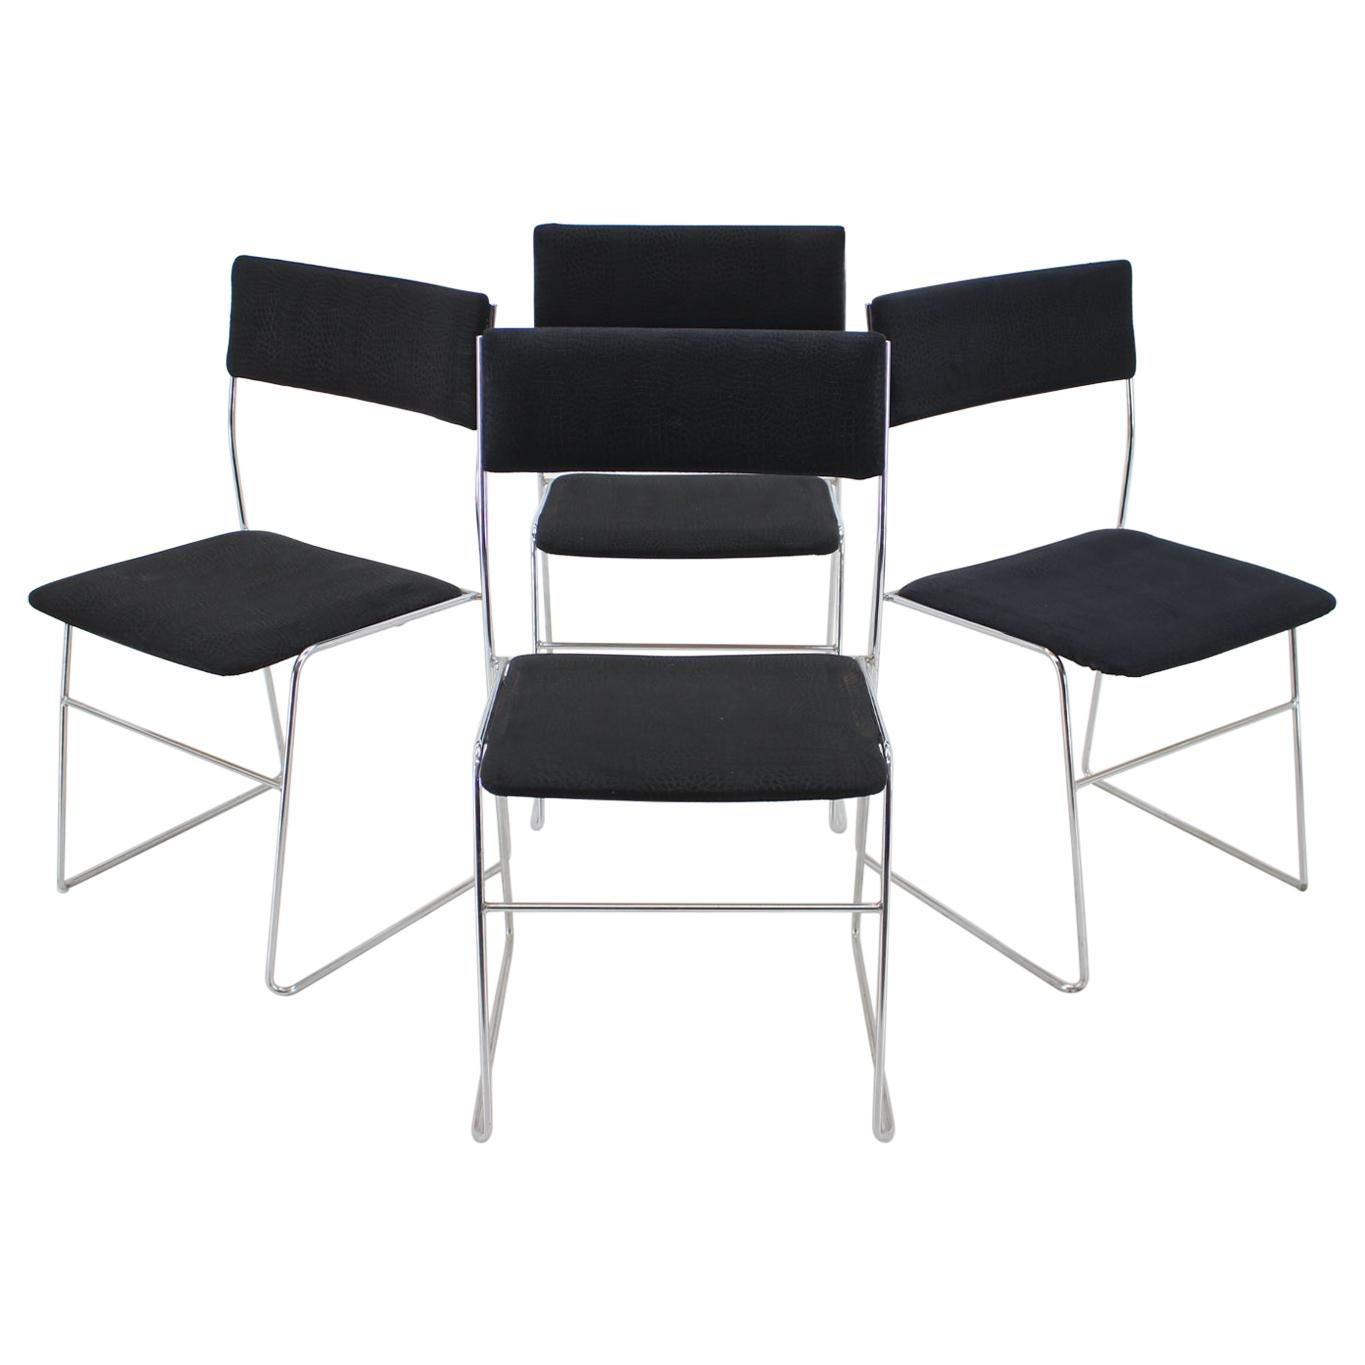 1970s Set of Four Minimalist Chrome Plated Dining Chairs, Czechoslovakia For Sale